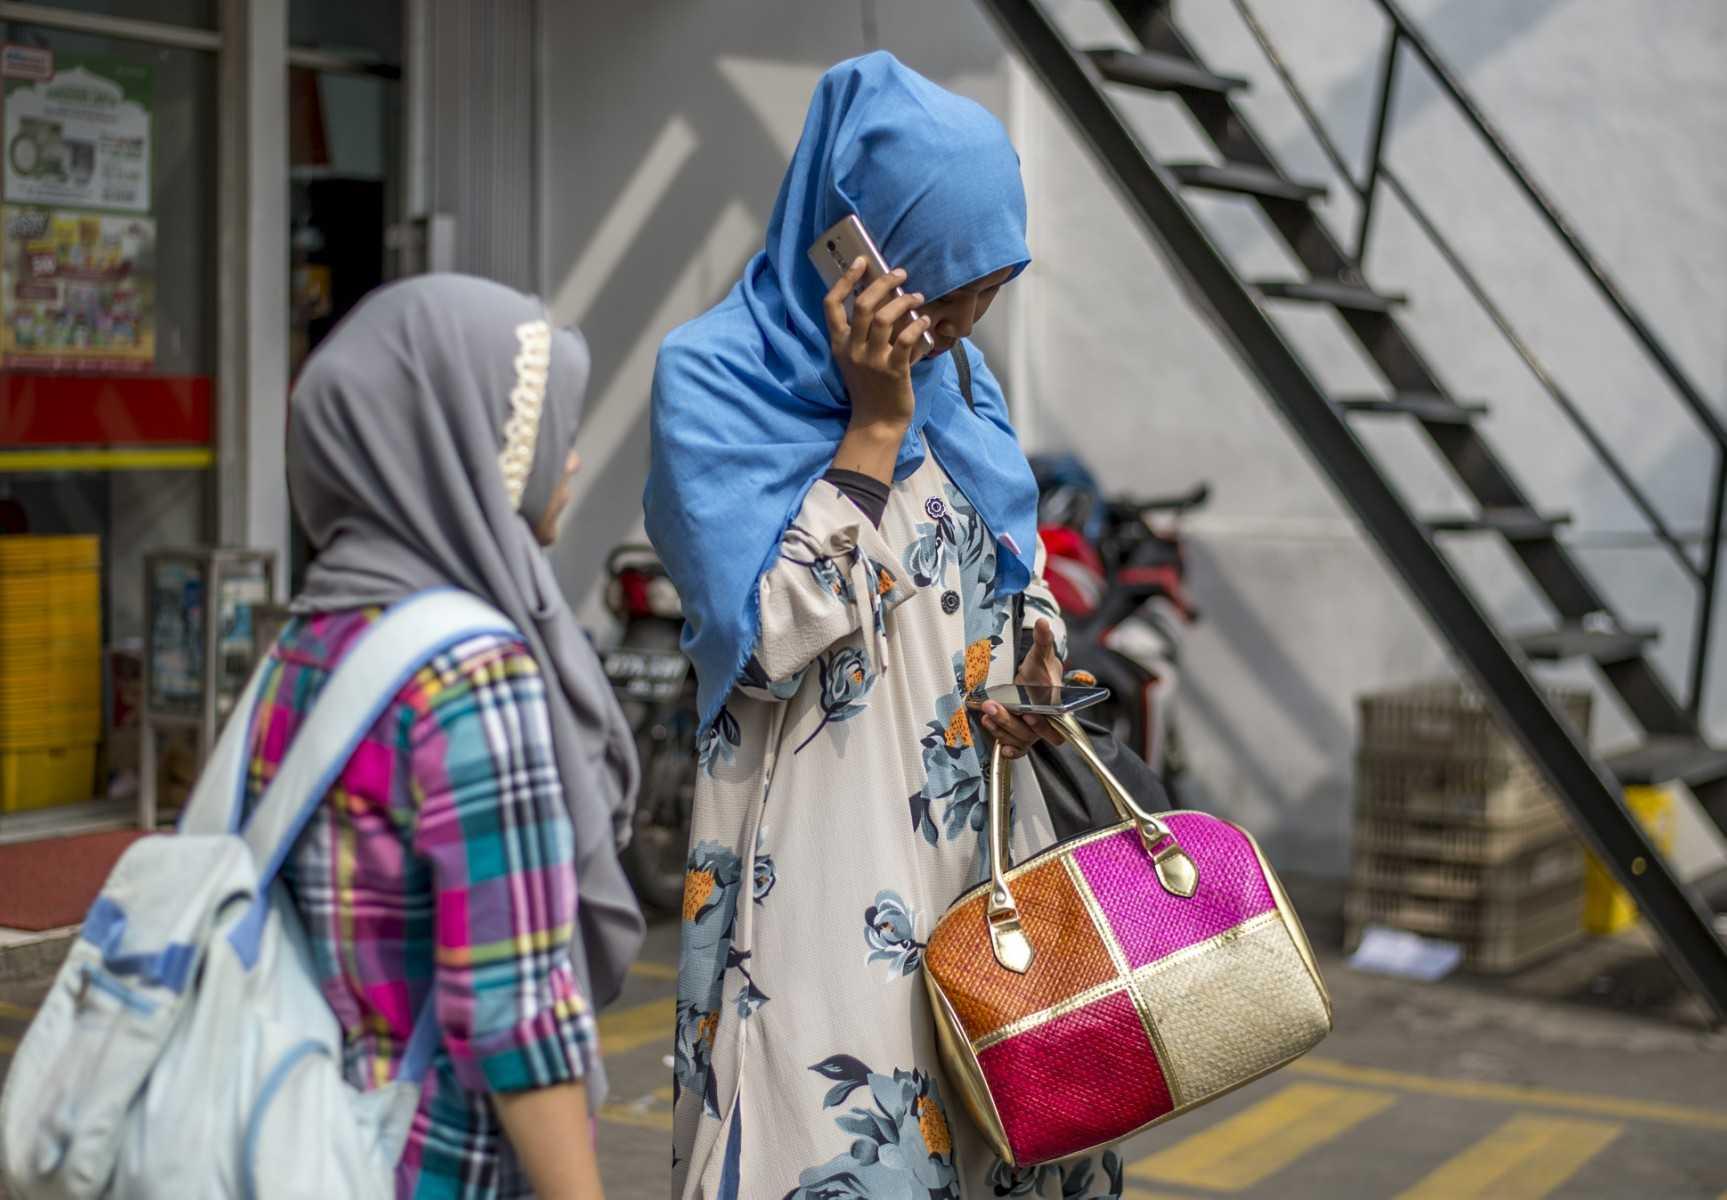 An Indonesian woman speaks on her mobile phone in Jakarta, Indonesia, on July 6, 2017. Photo: AFP